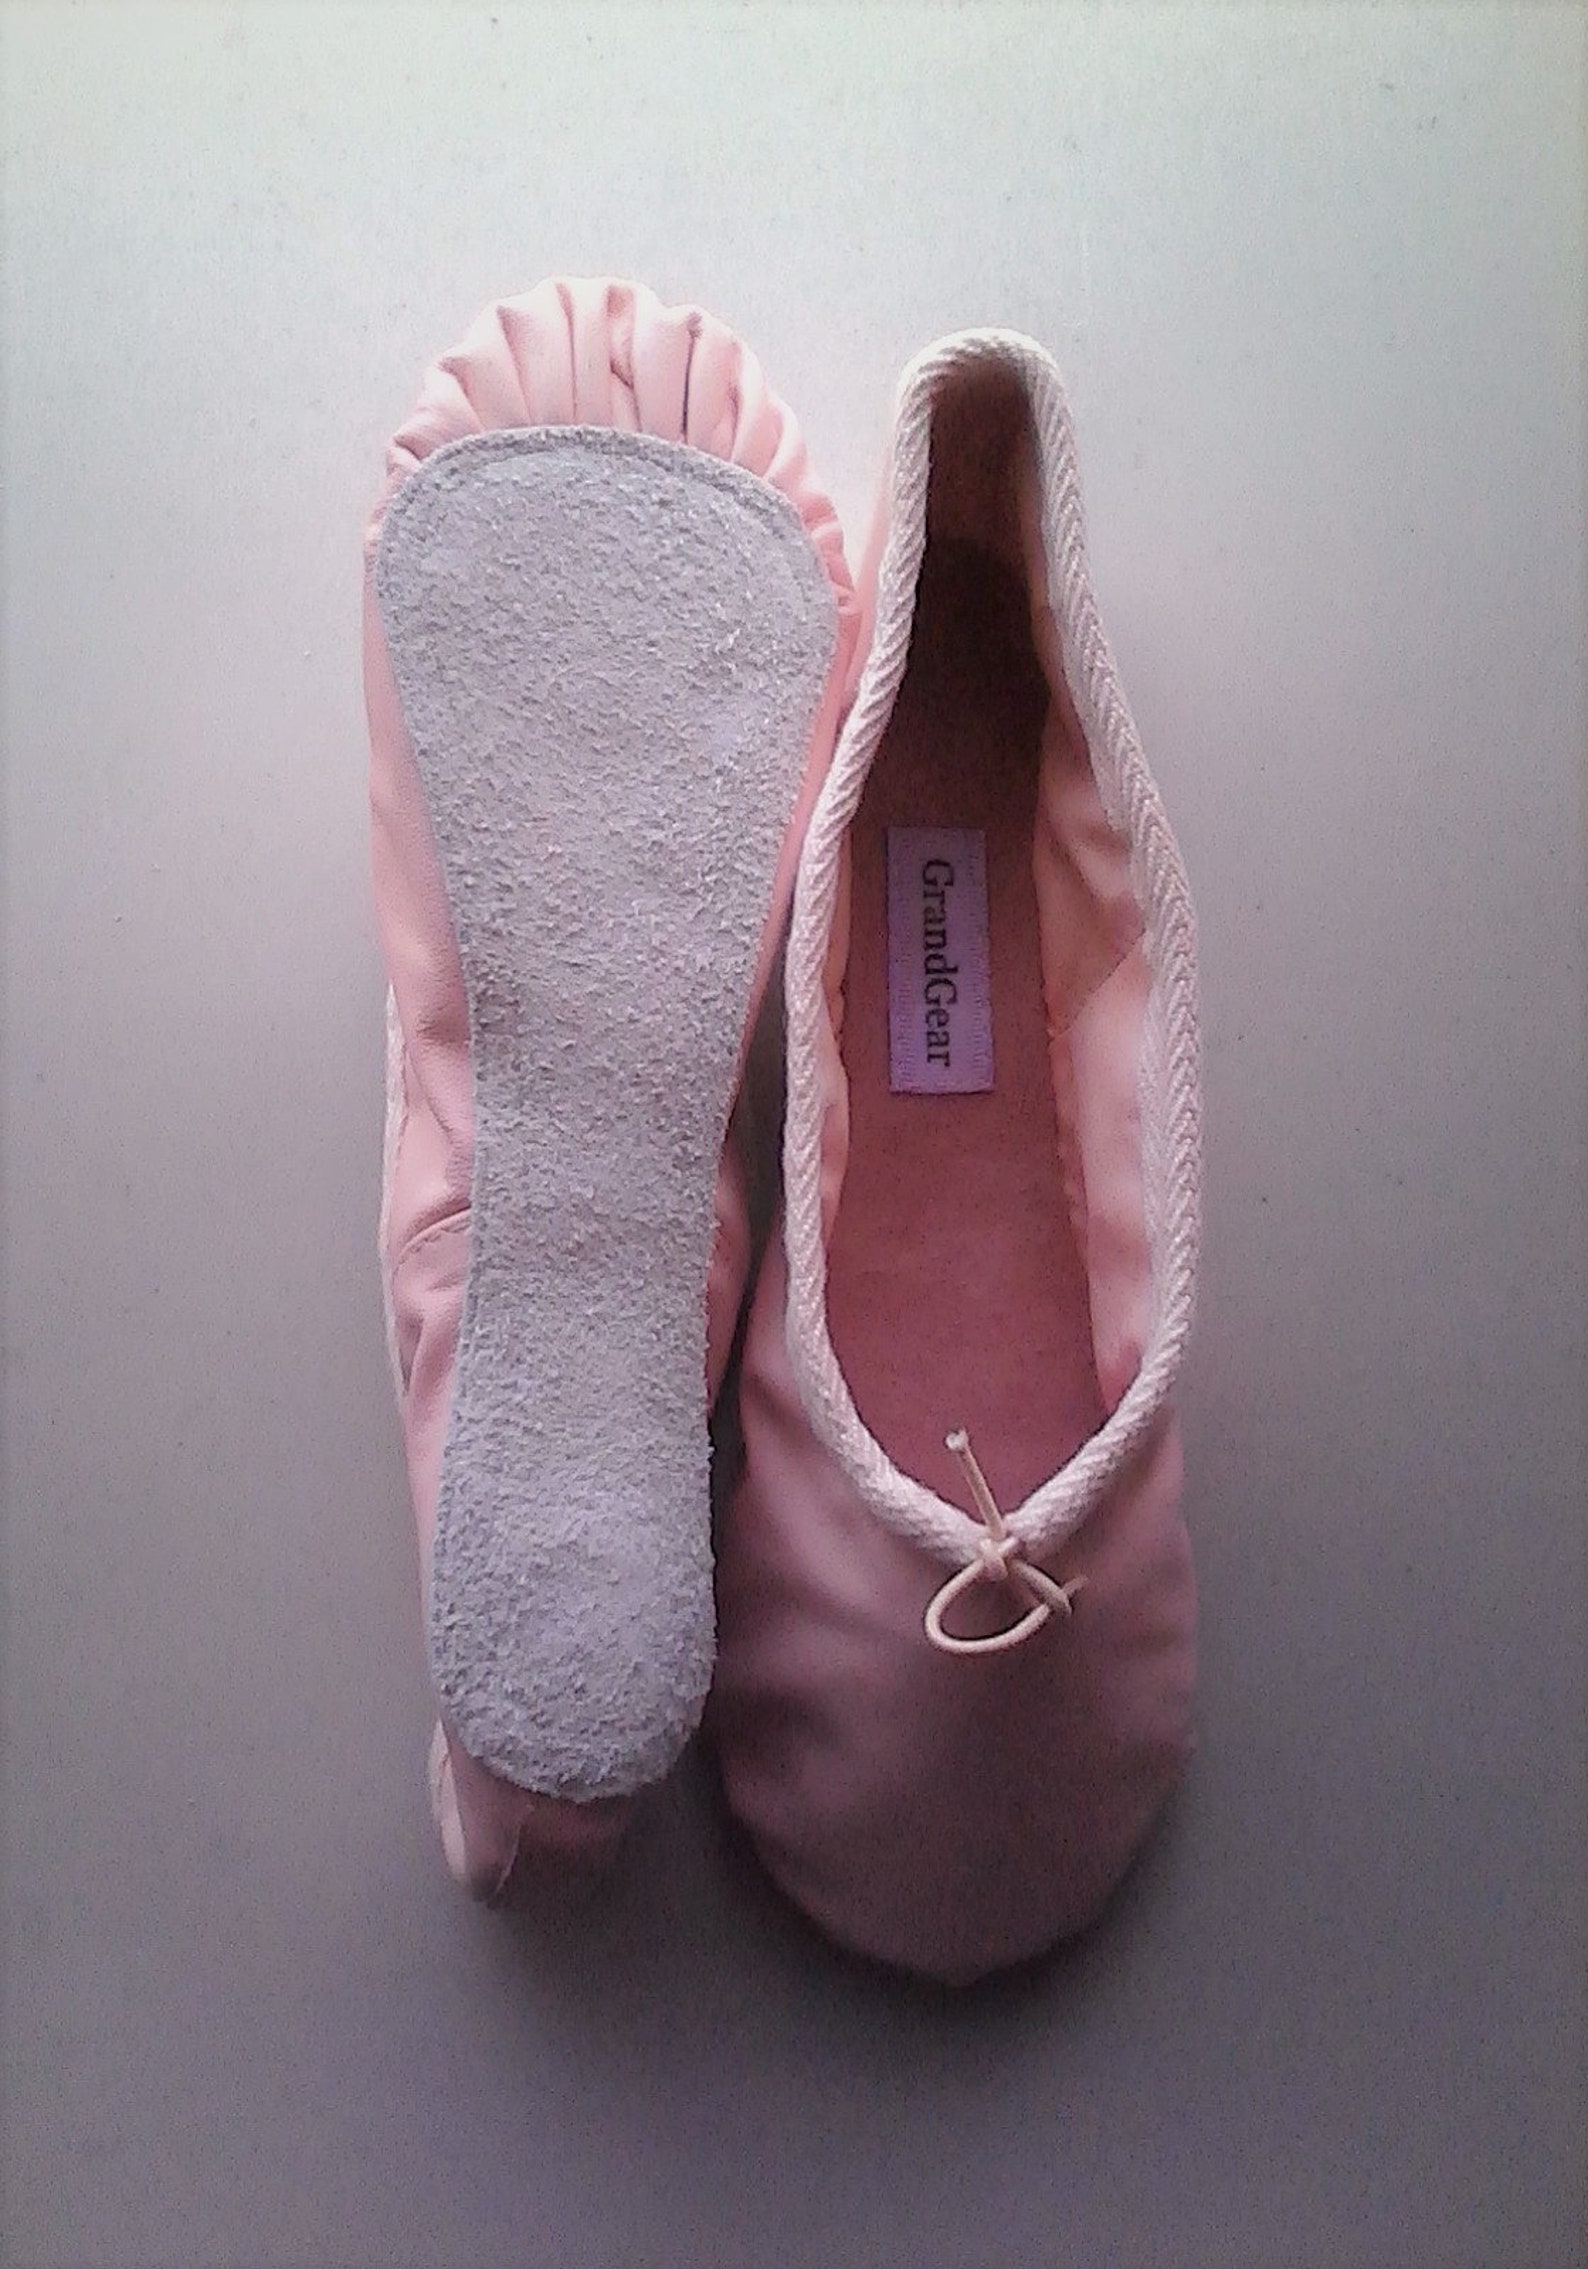 ballet pink leather ballet slippers - adult/women's sizes - full sole or split sole